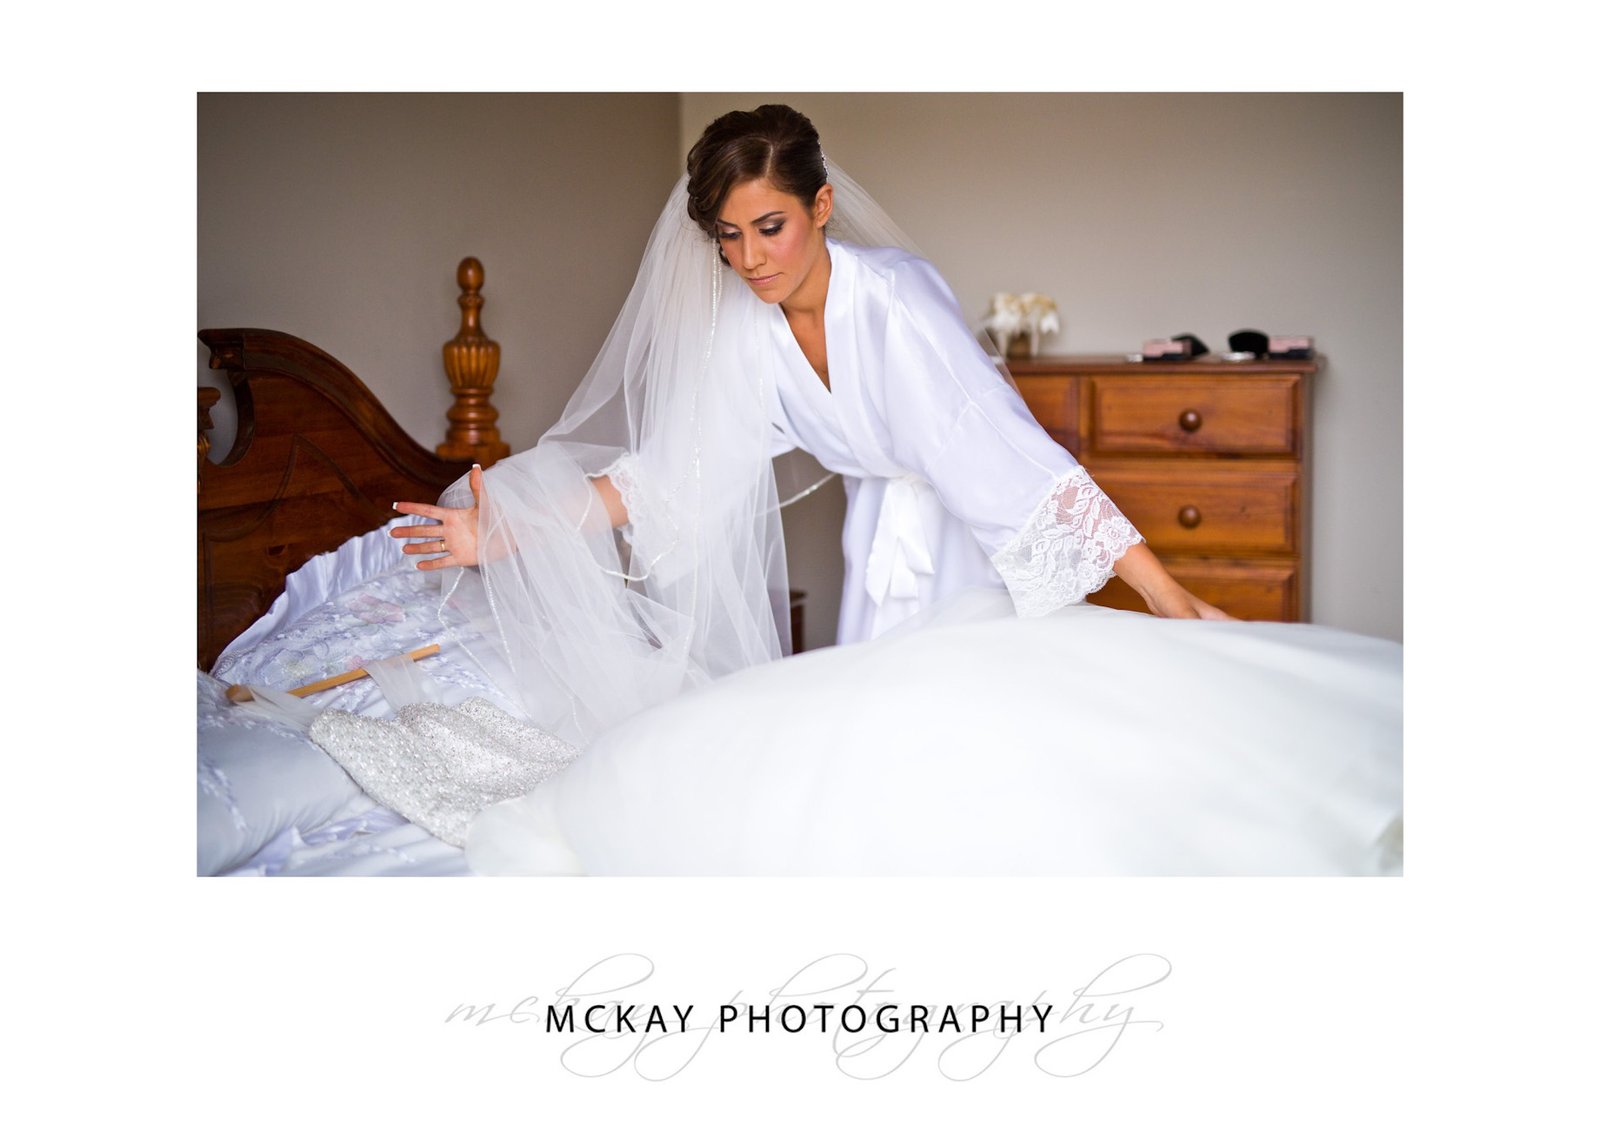 Mary lays her wedding dress on bed